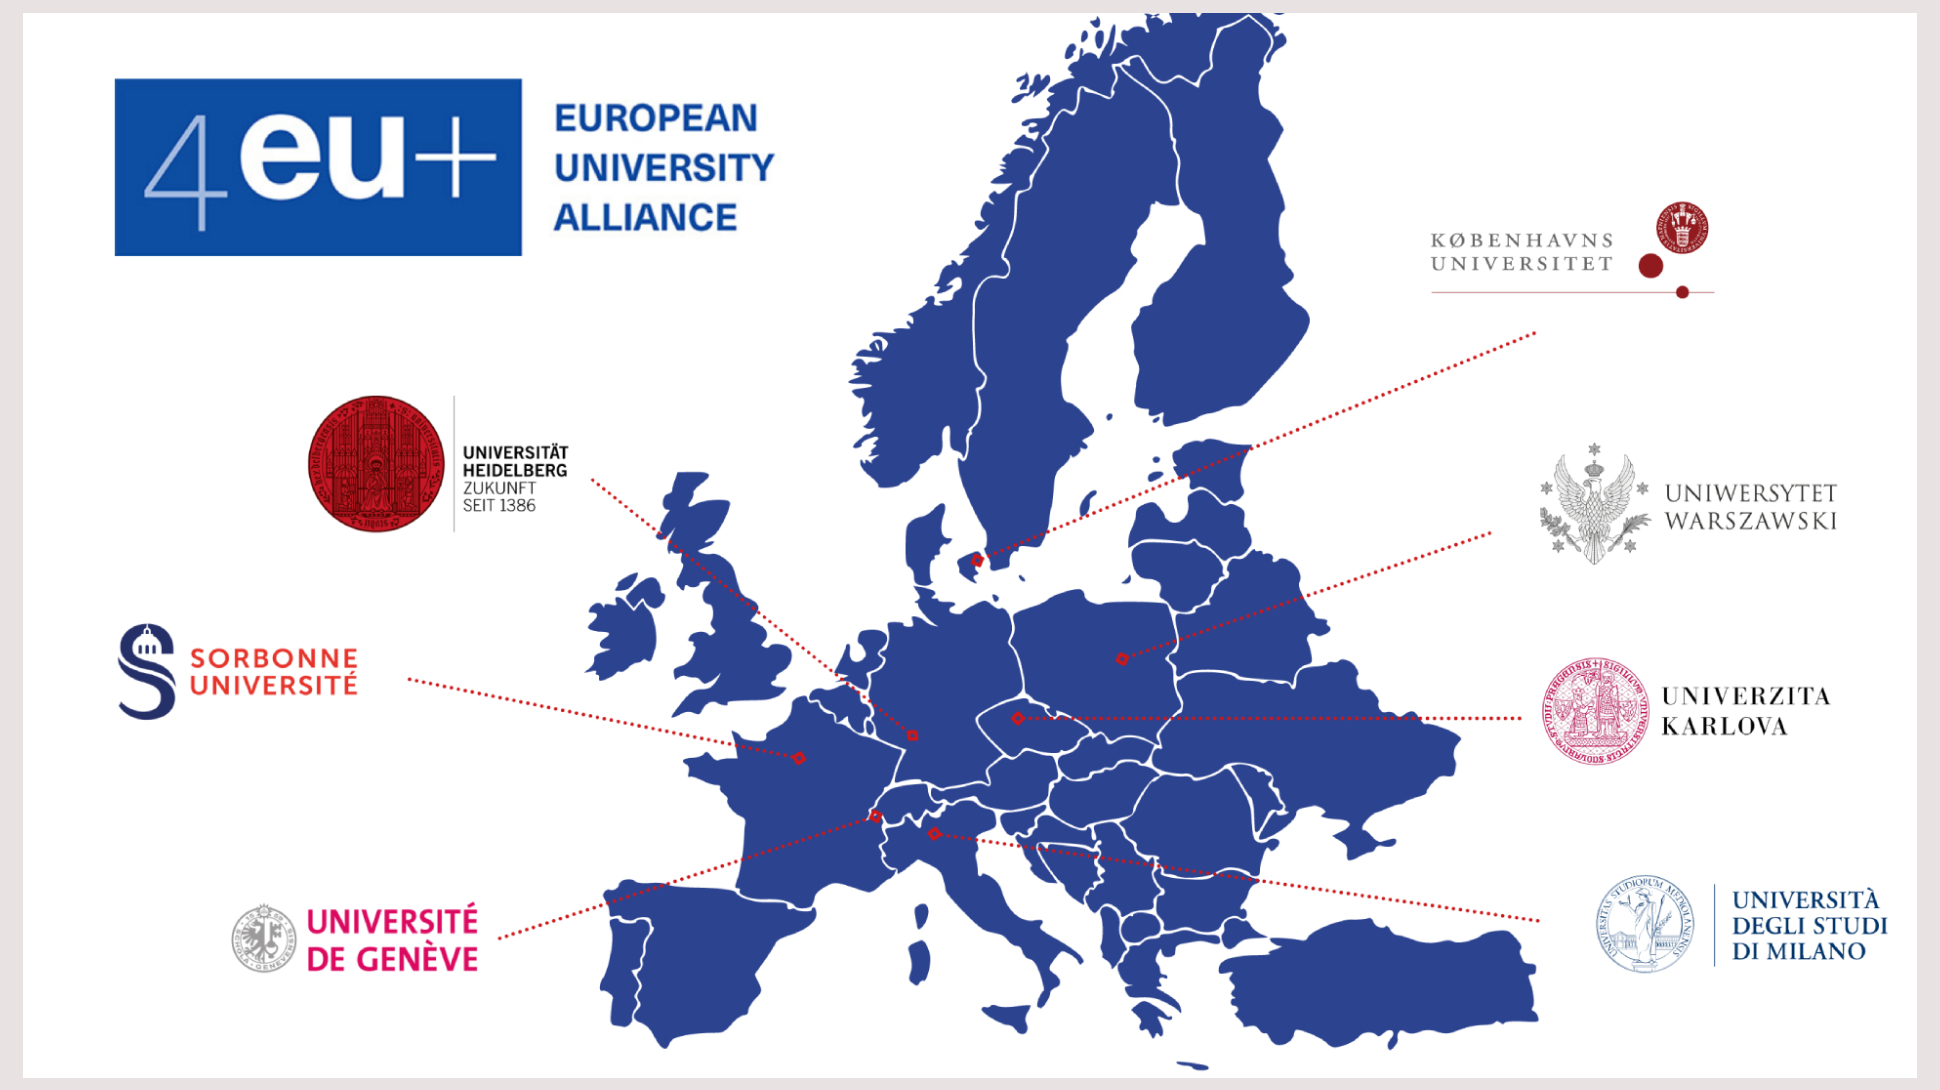 The newly expanded 4EU+ Alliance succeeds with 1CORE project!